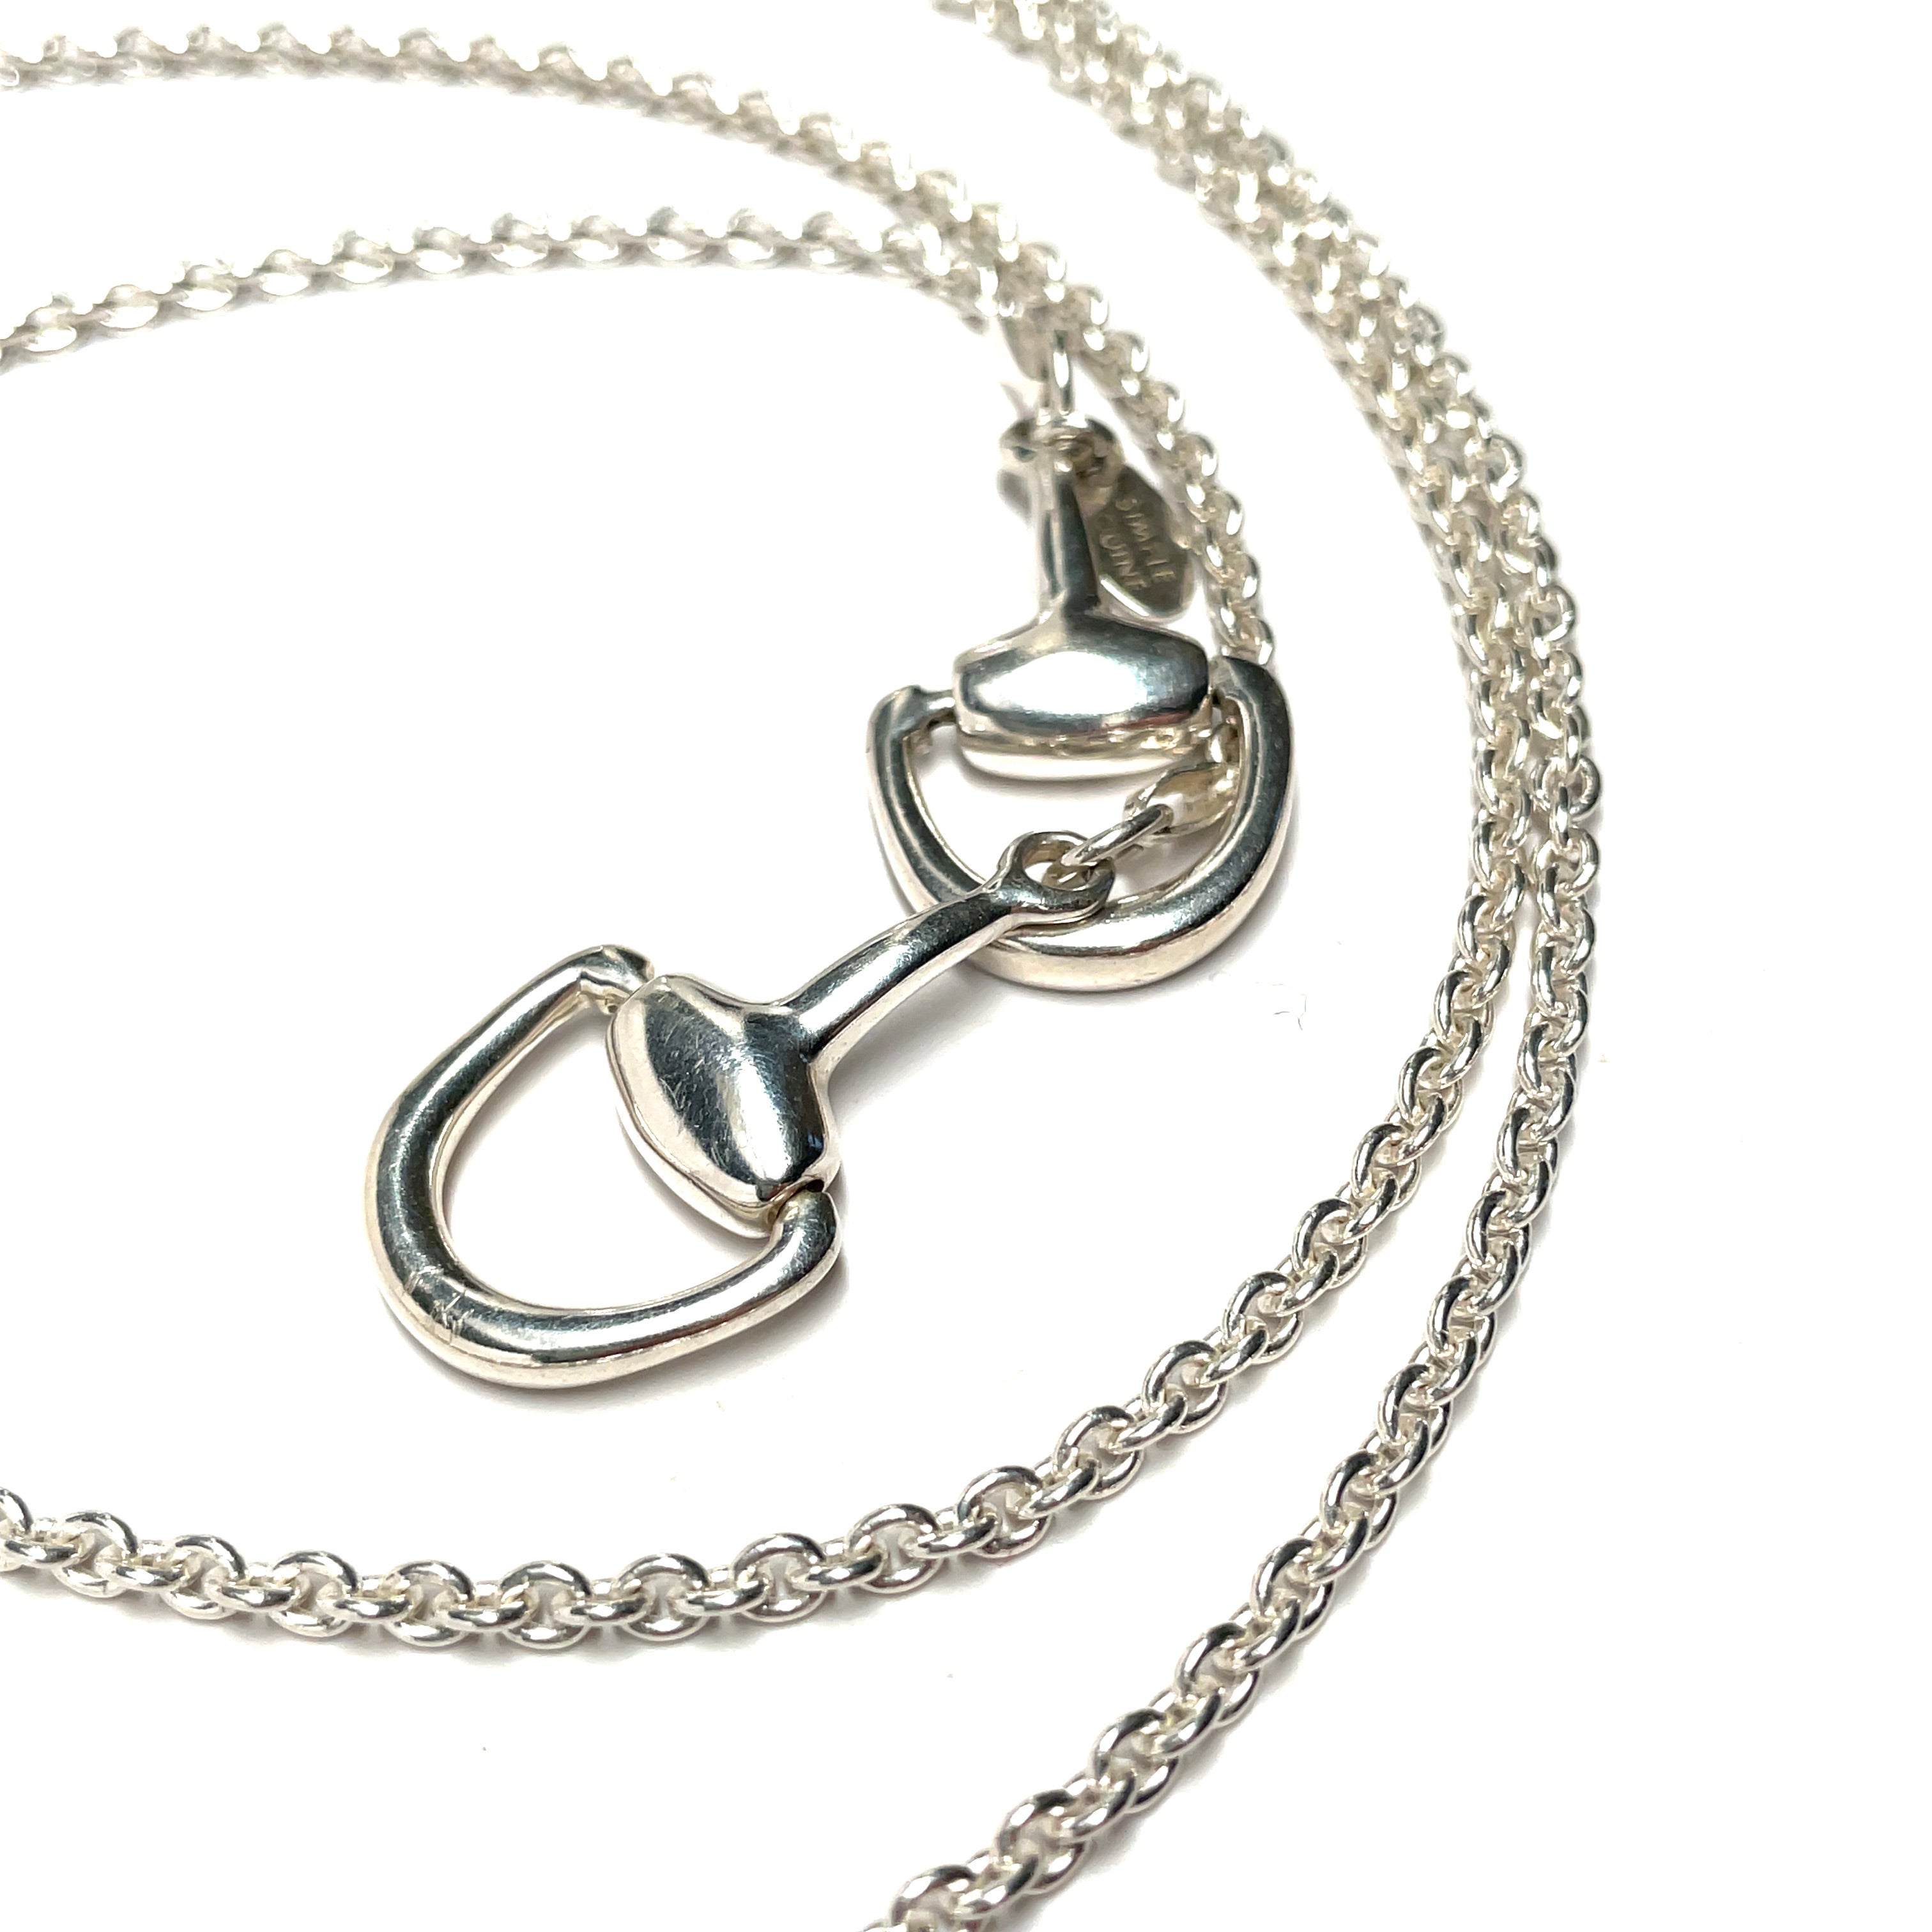 Silver snaffle bit lariat necklace